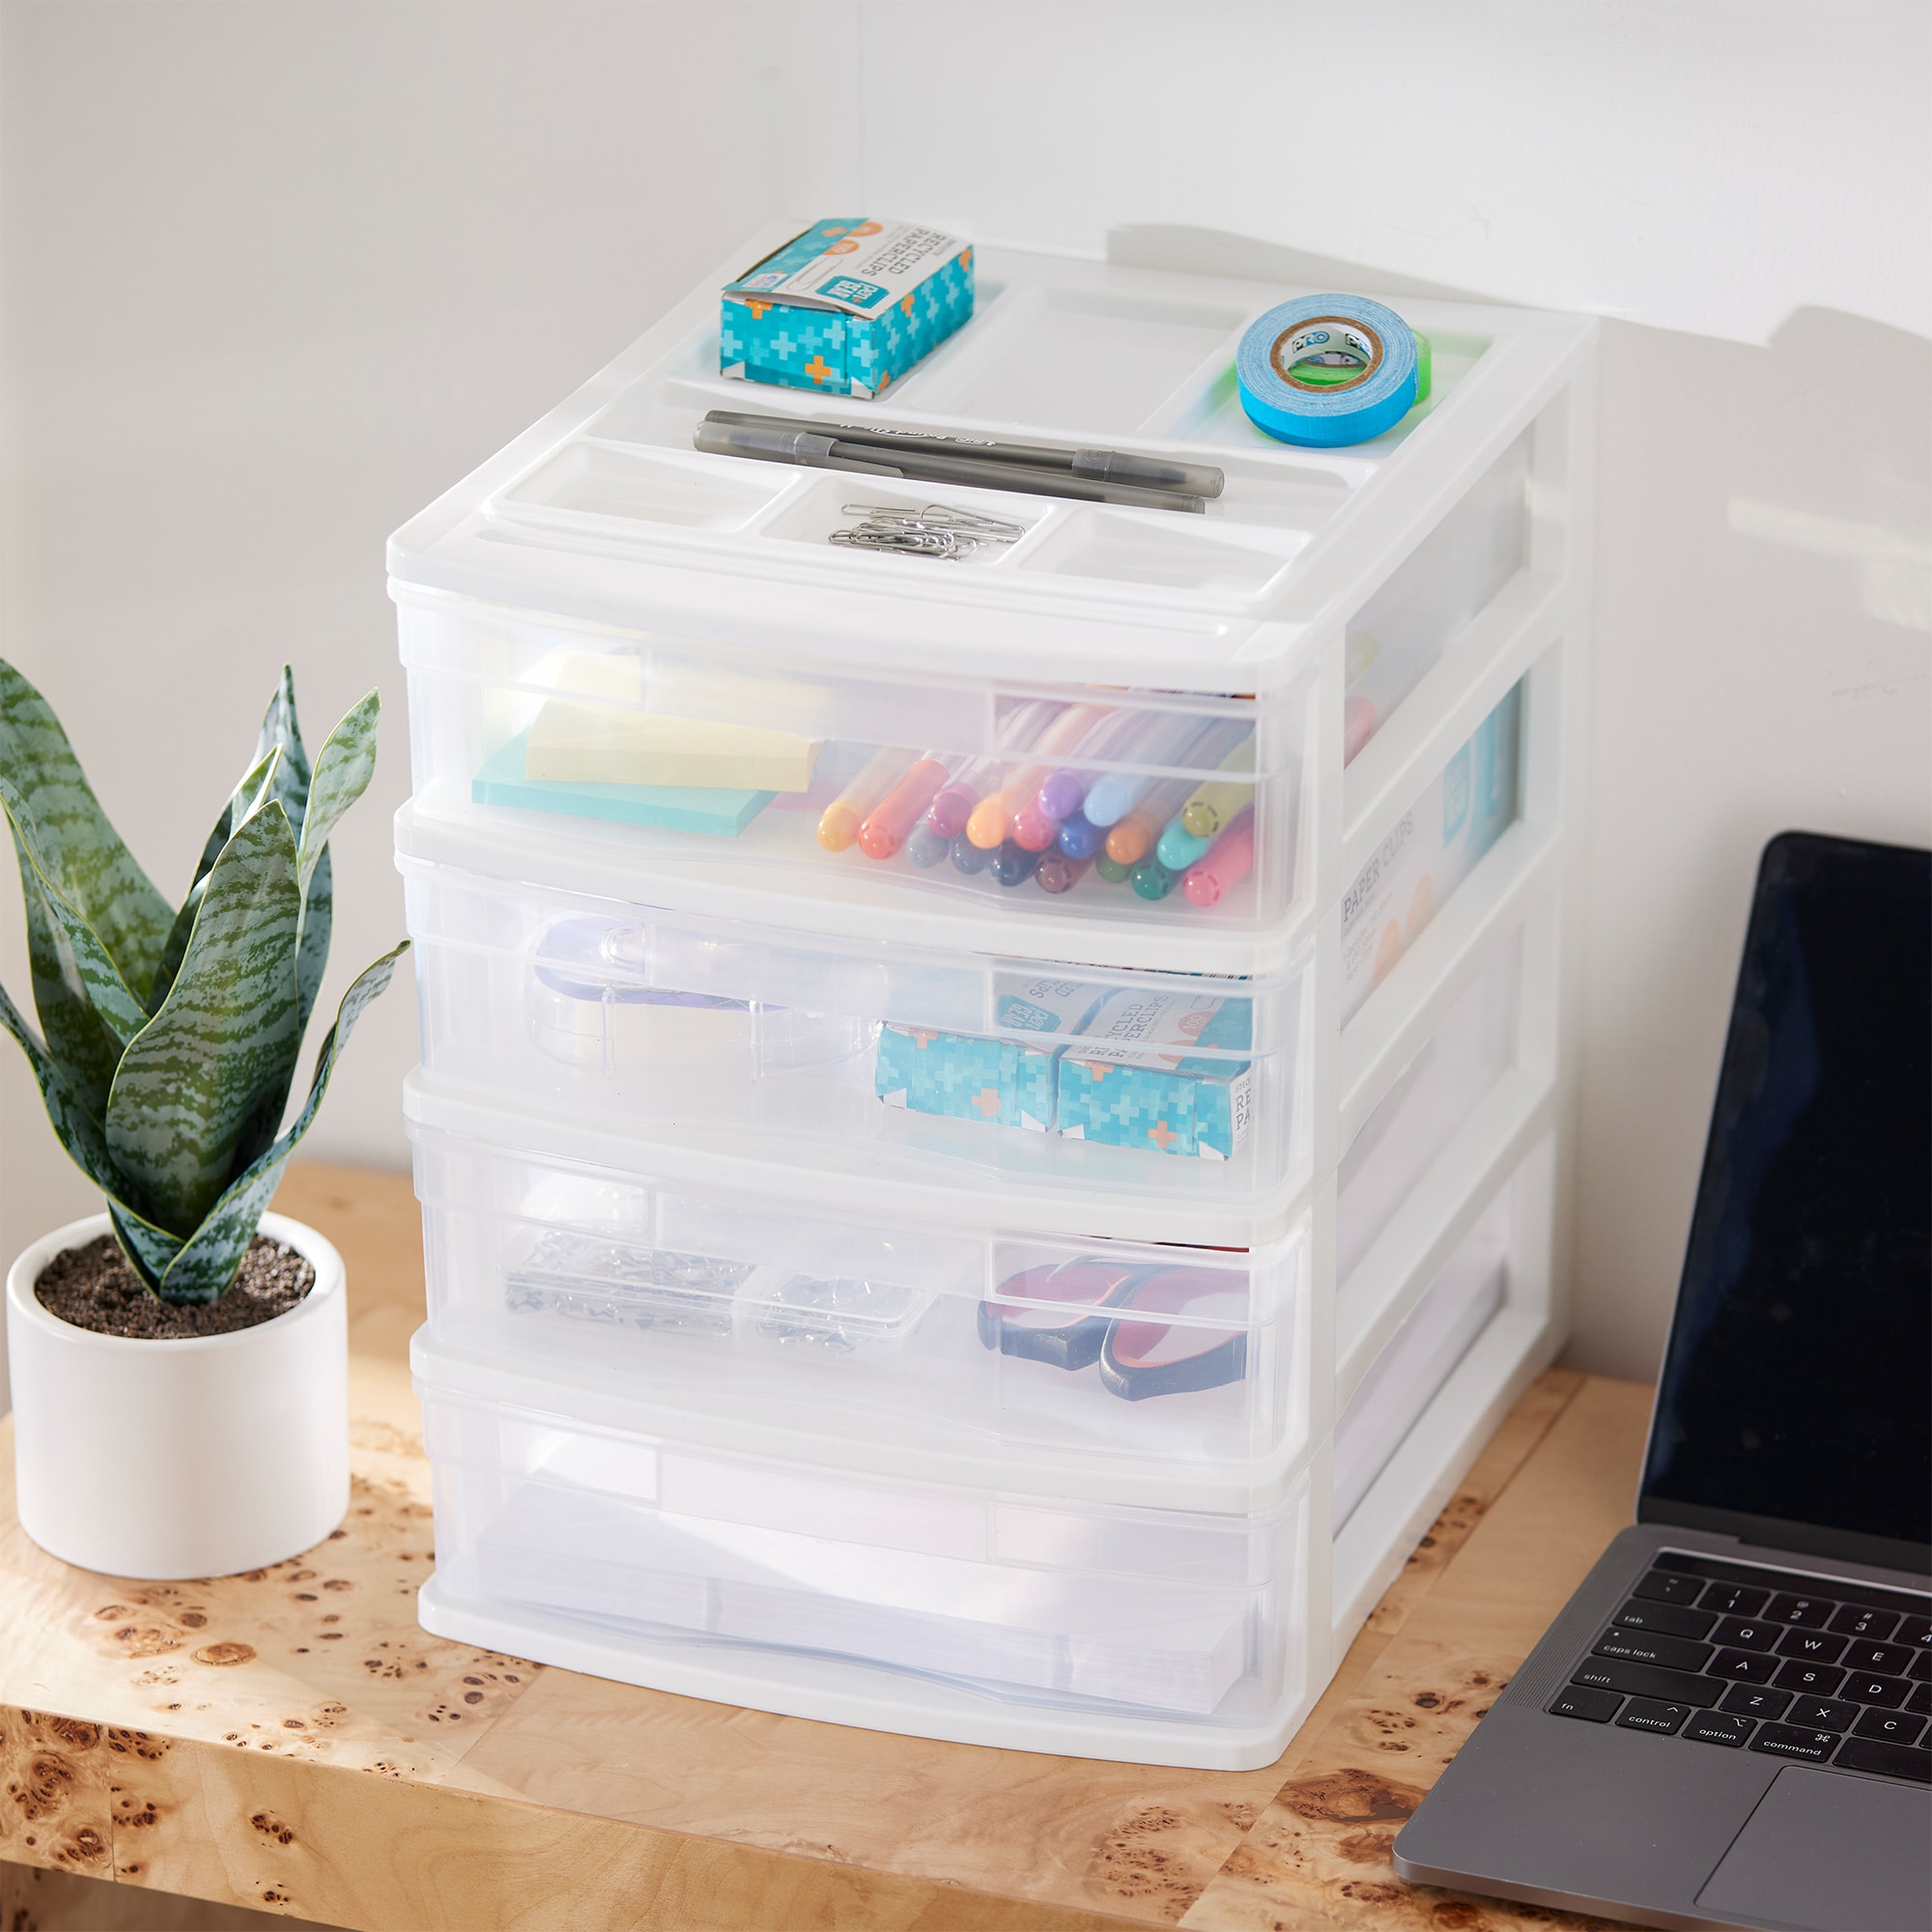 Gracious Living 3-Pack 4-Drawers White Stackable Plastic Storage Drawer  12.75-in H x 12-in W x 10-in D in the Storage Drawers department at